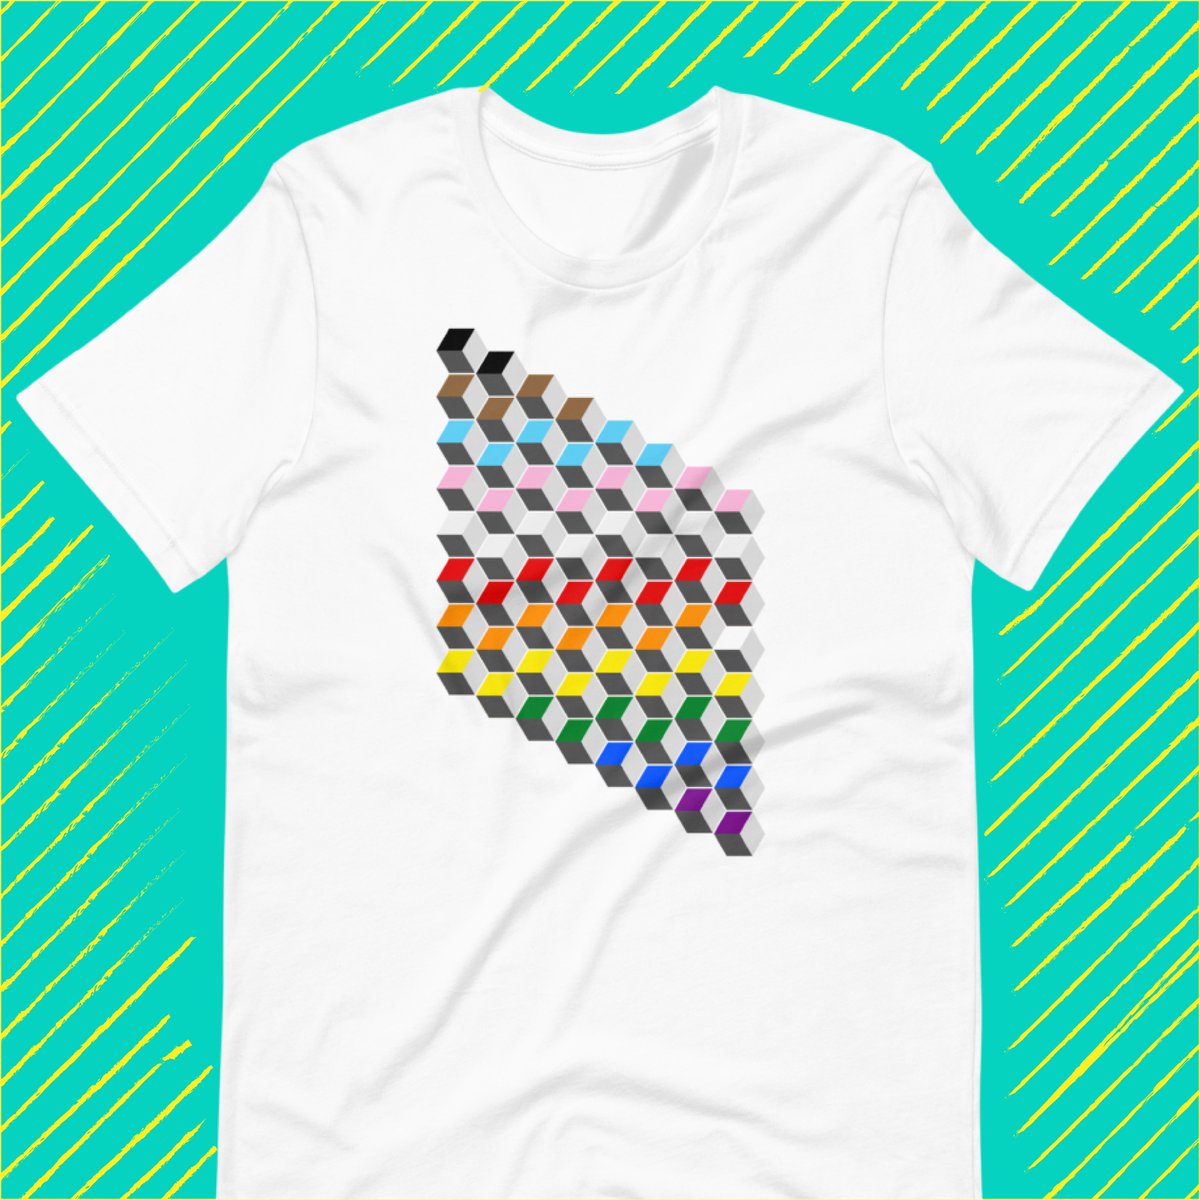 Just put this awesome opart Progressive Pride Flag T-shirt in the shop. #LGBTQ #lgbtfashion #LGBT 
therainbowstores.com/collections/t-…